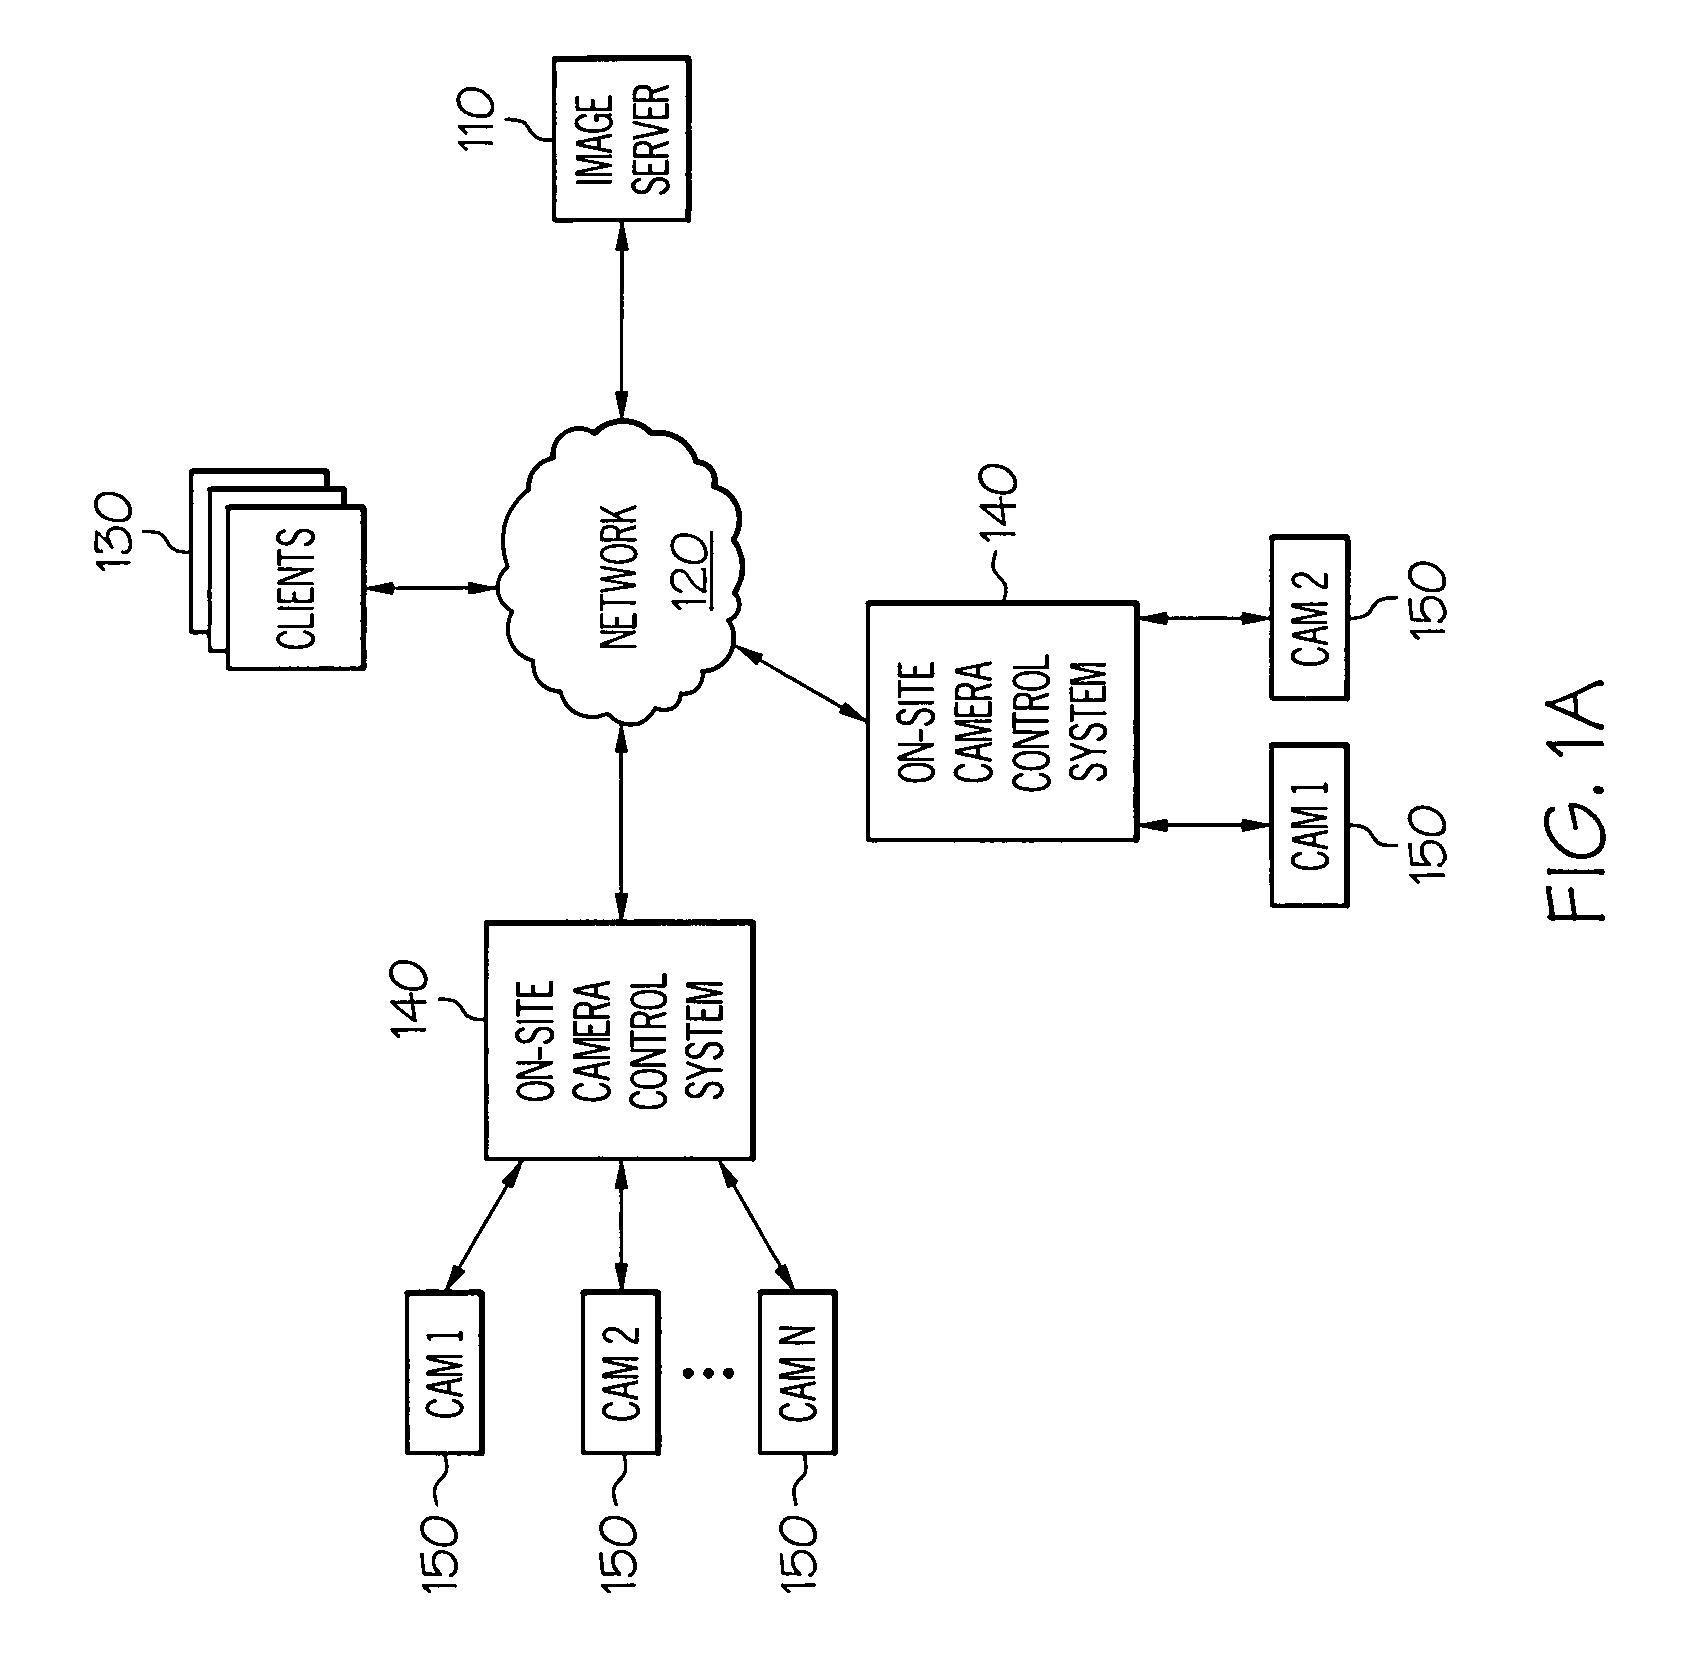 Method and apparatus for hosting a network camera with image degradation